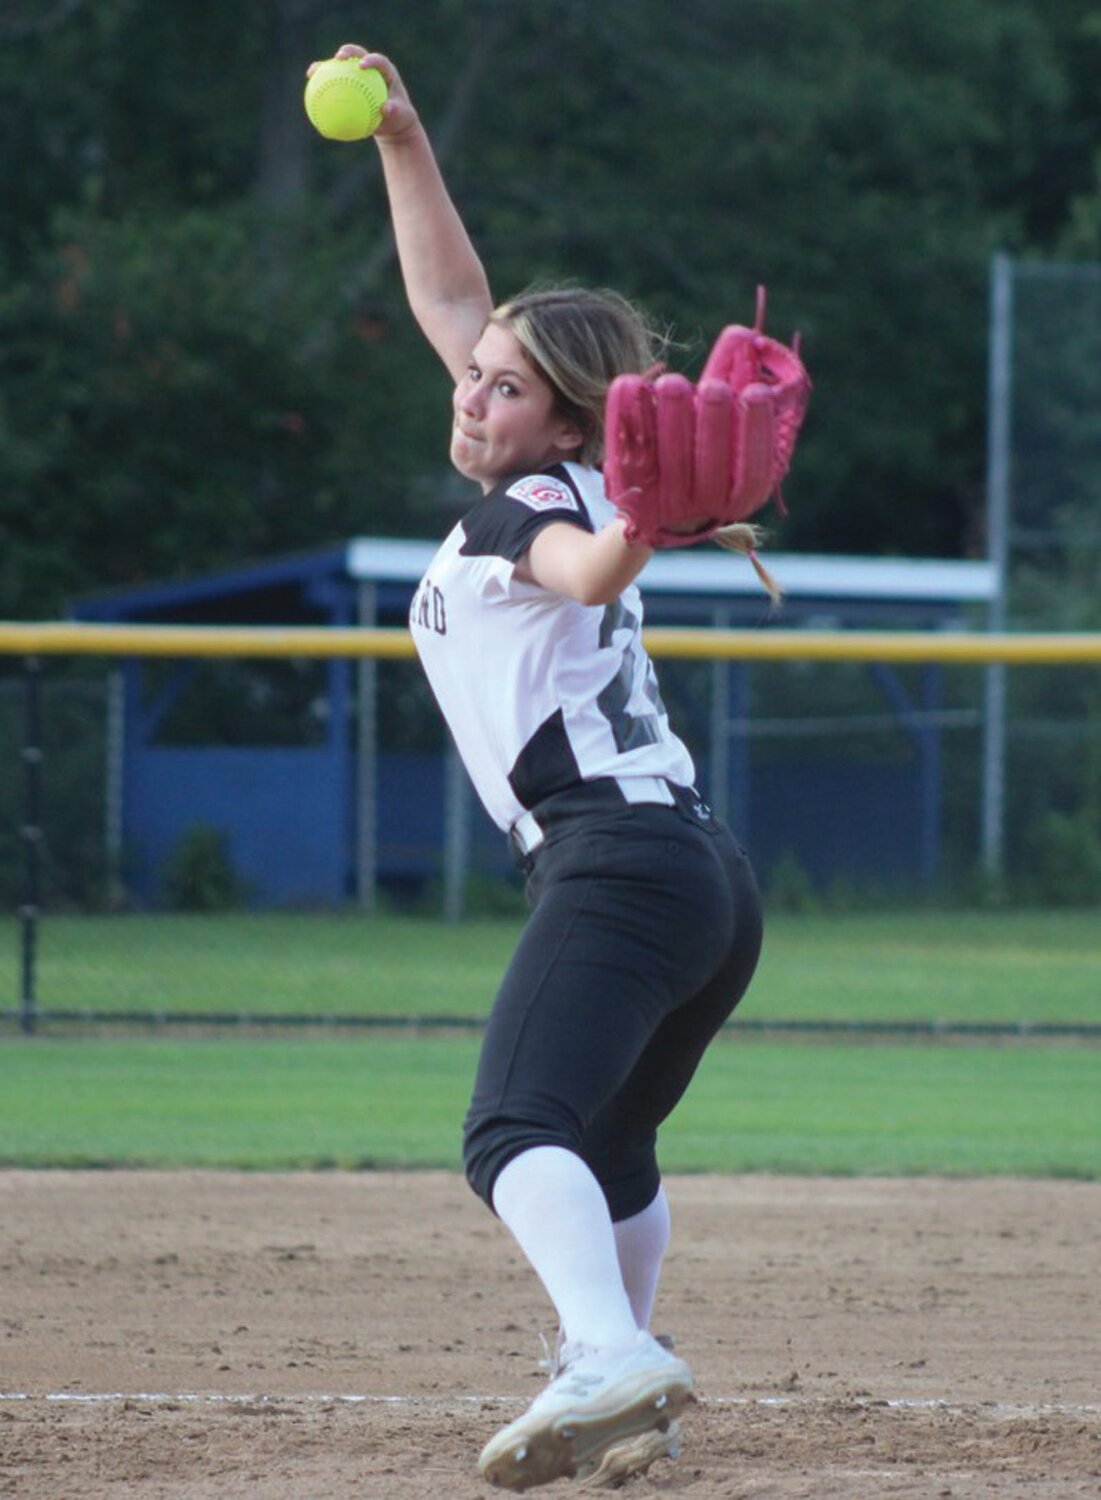 ATHLETE OF THE WEEK HALEY BOUDREAU:The Warwick Beacon’s Athlete of the Week is Warwick North pitcher Haley Boudreau. Boudreau has been a force for the team in the regional bracket. With a trip to the World Series on the line, Boudreau pitched a perfect game on Monday afternoon to help the team advance in the tournament while also knocking in multiple runs at the plate. (Photos by Alex Sponseller)